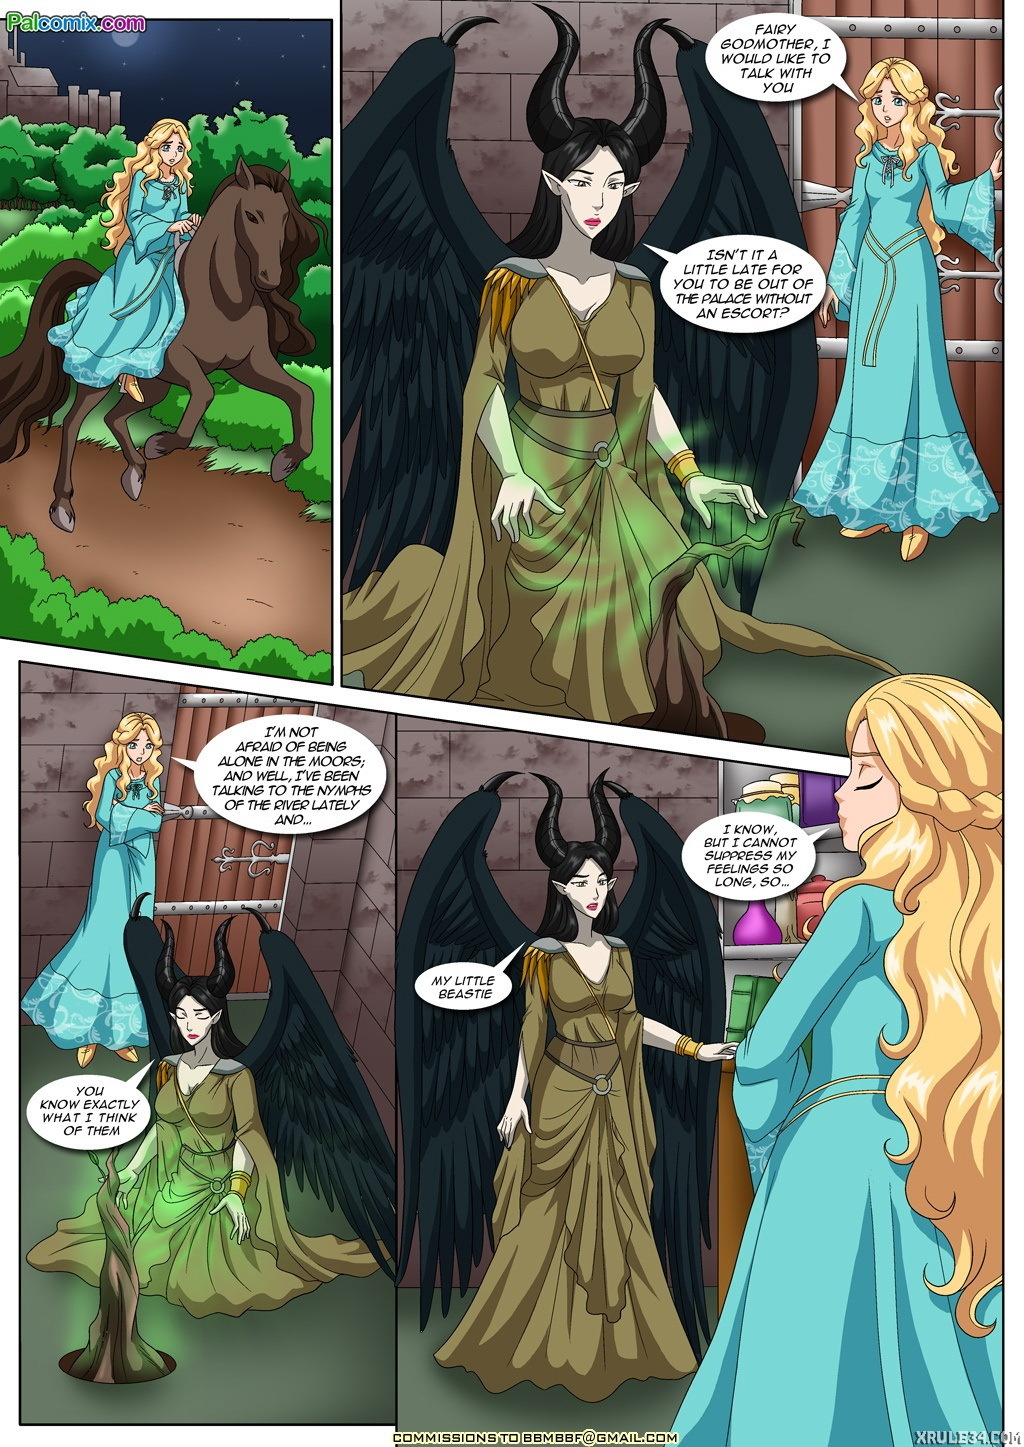 Coming of Age - Sleeping Beauty - Page 6